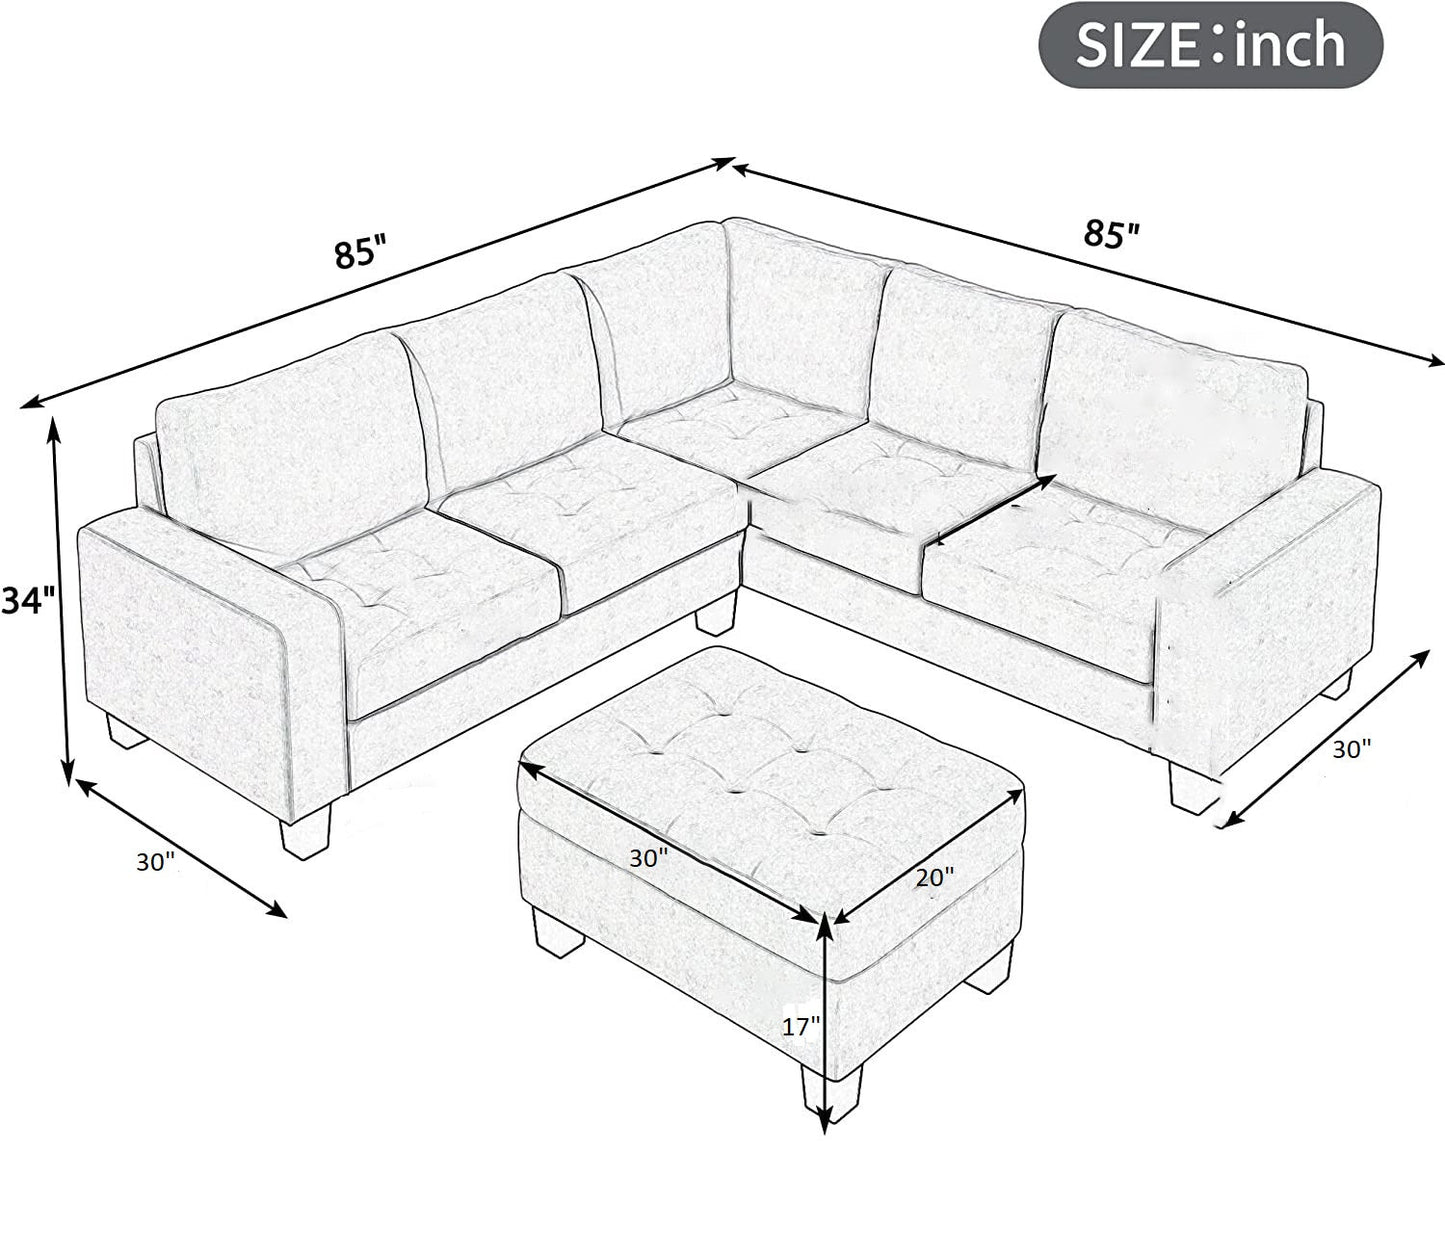 Christopher 5 Seater L Shape Fabric Sofa With Ottoman - Torque India